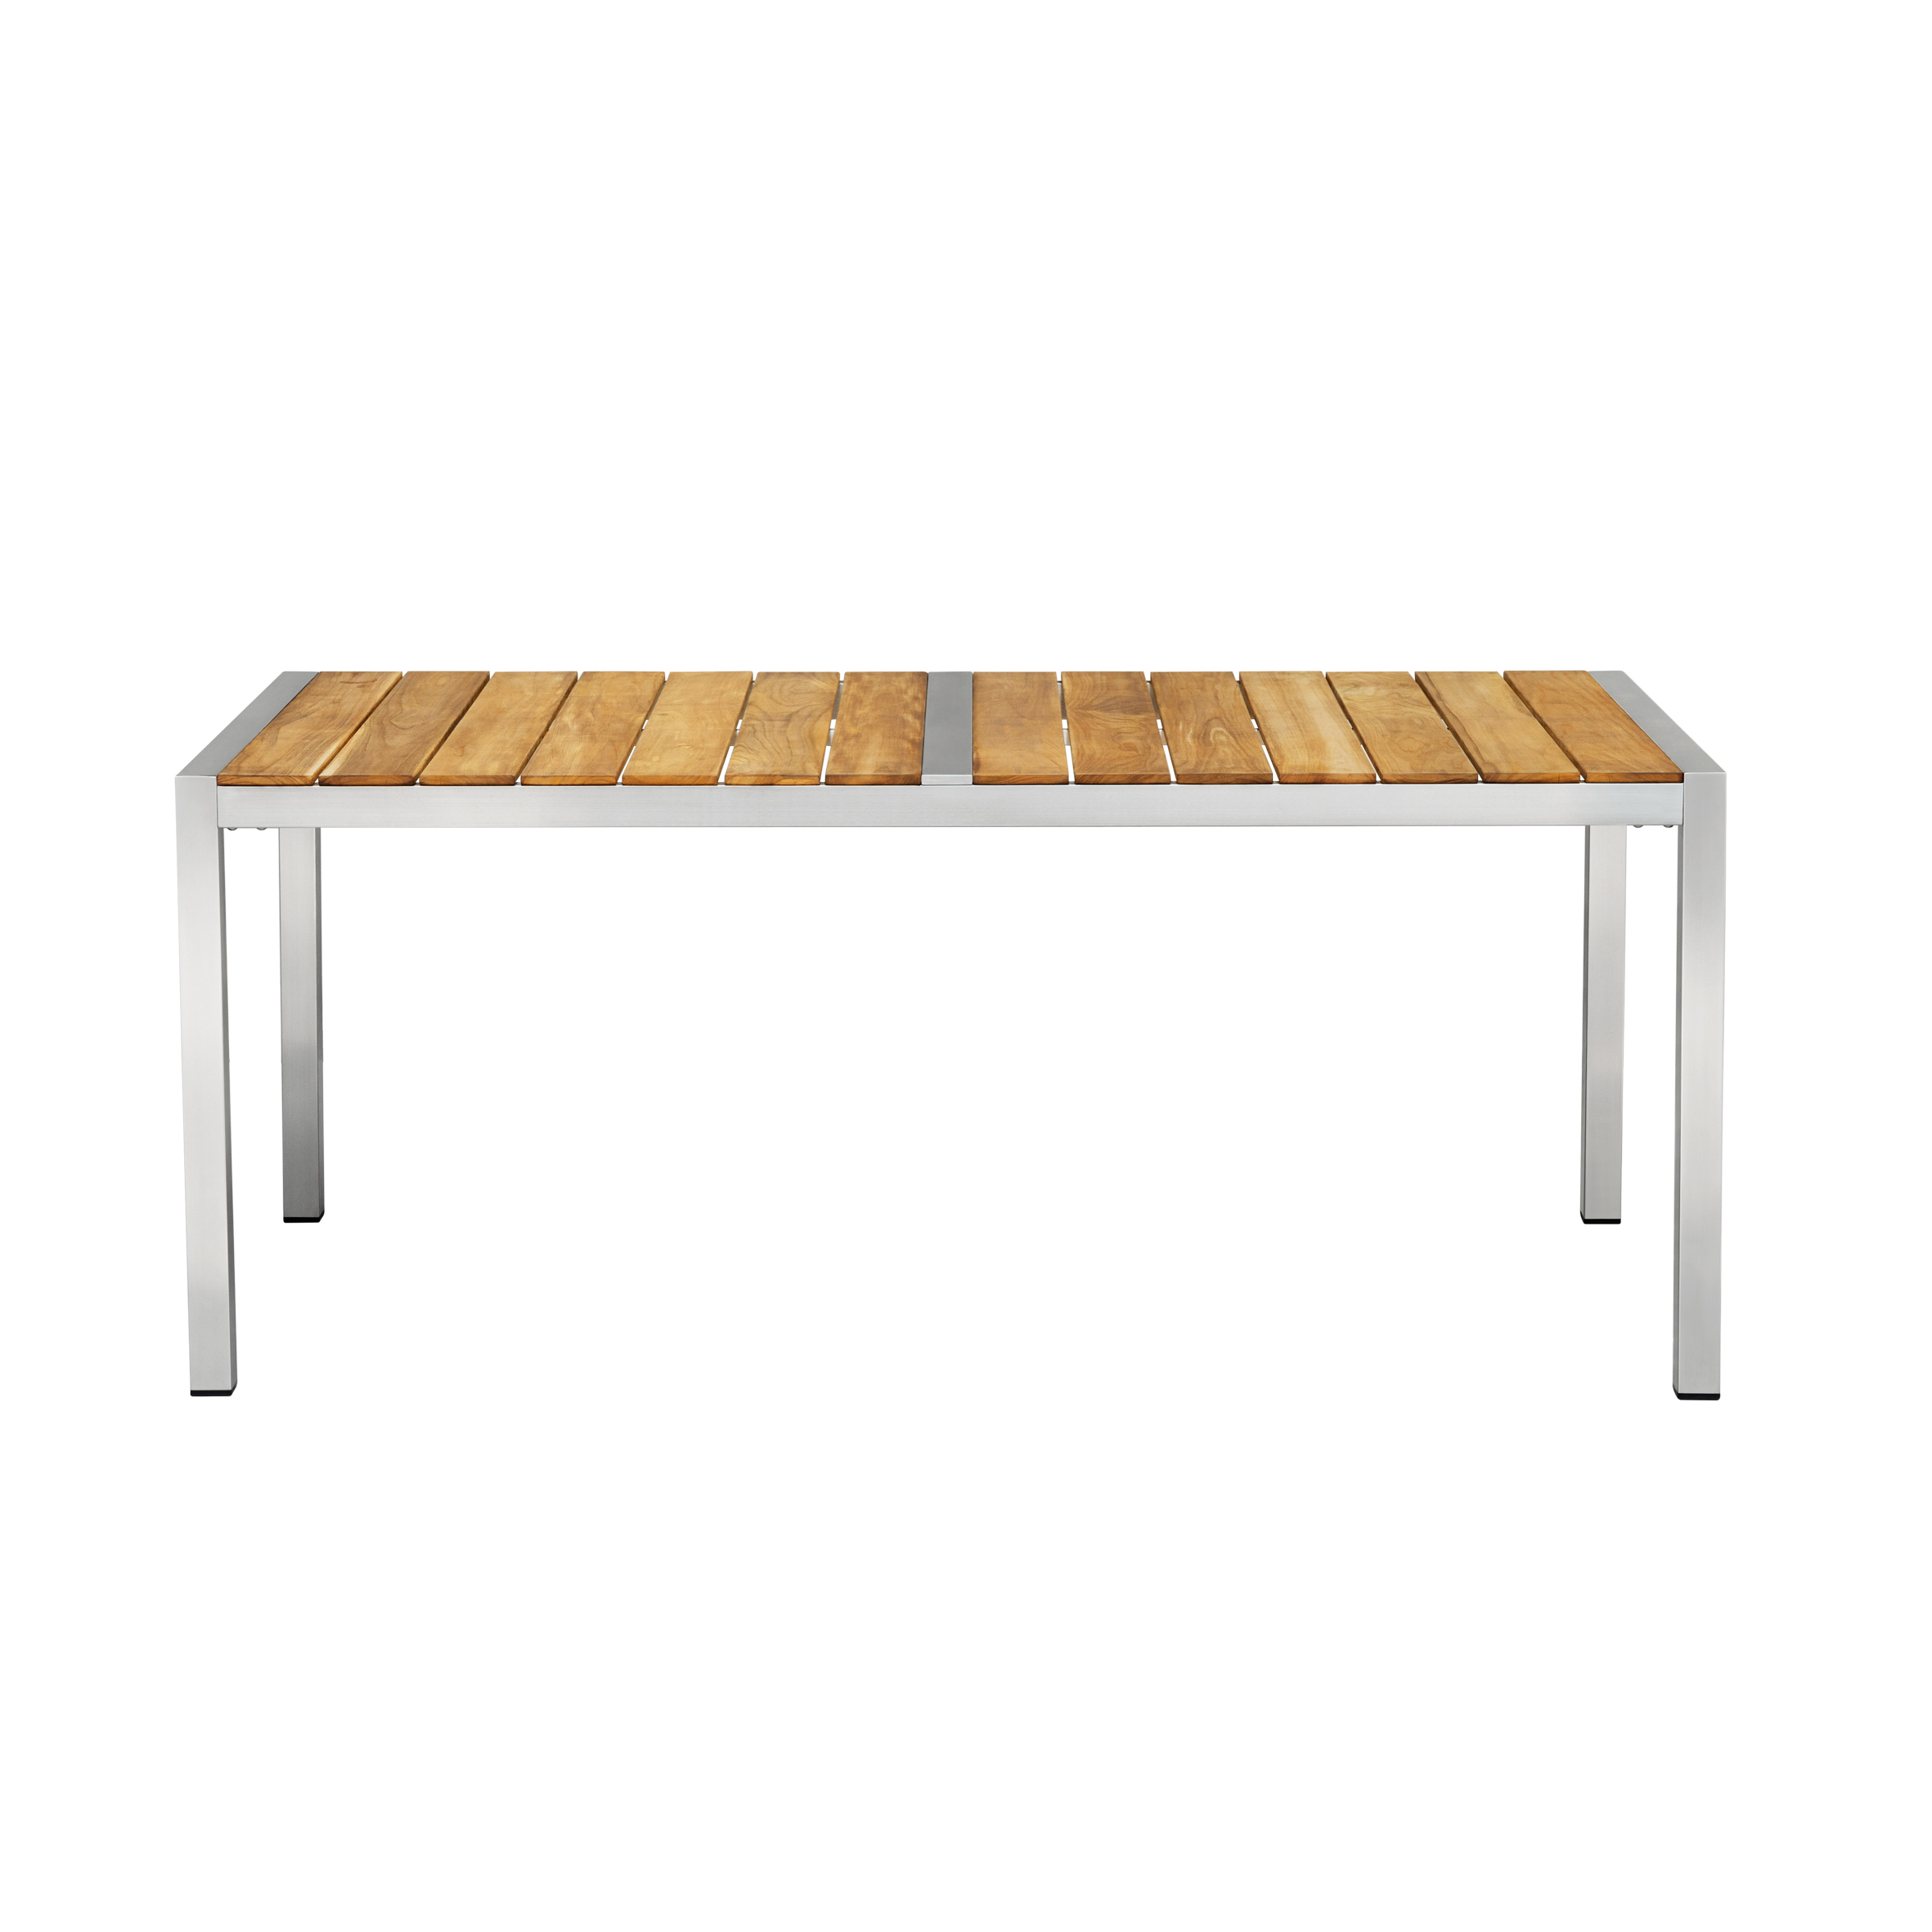 Hills rectangle table S2